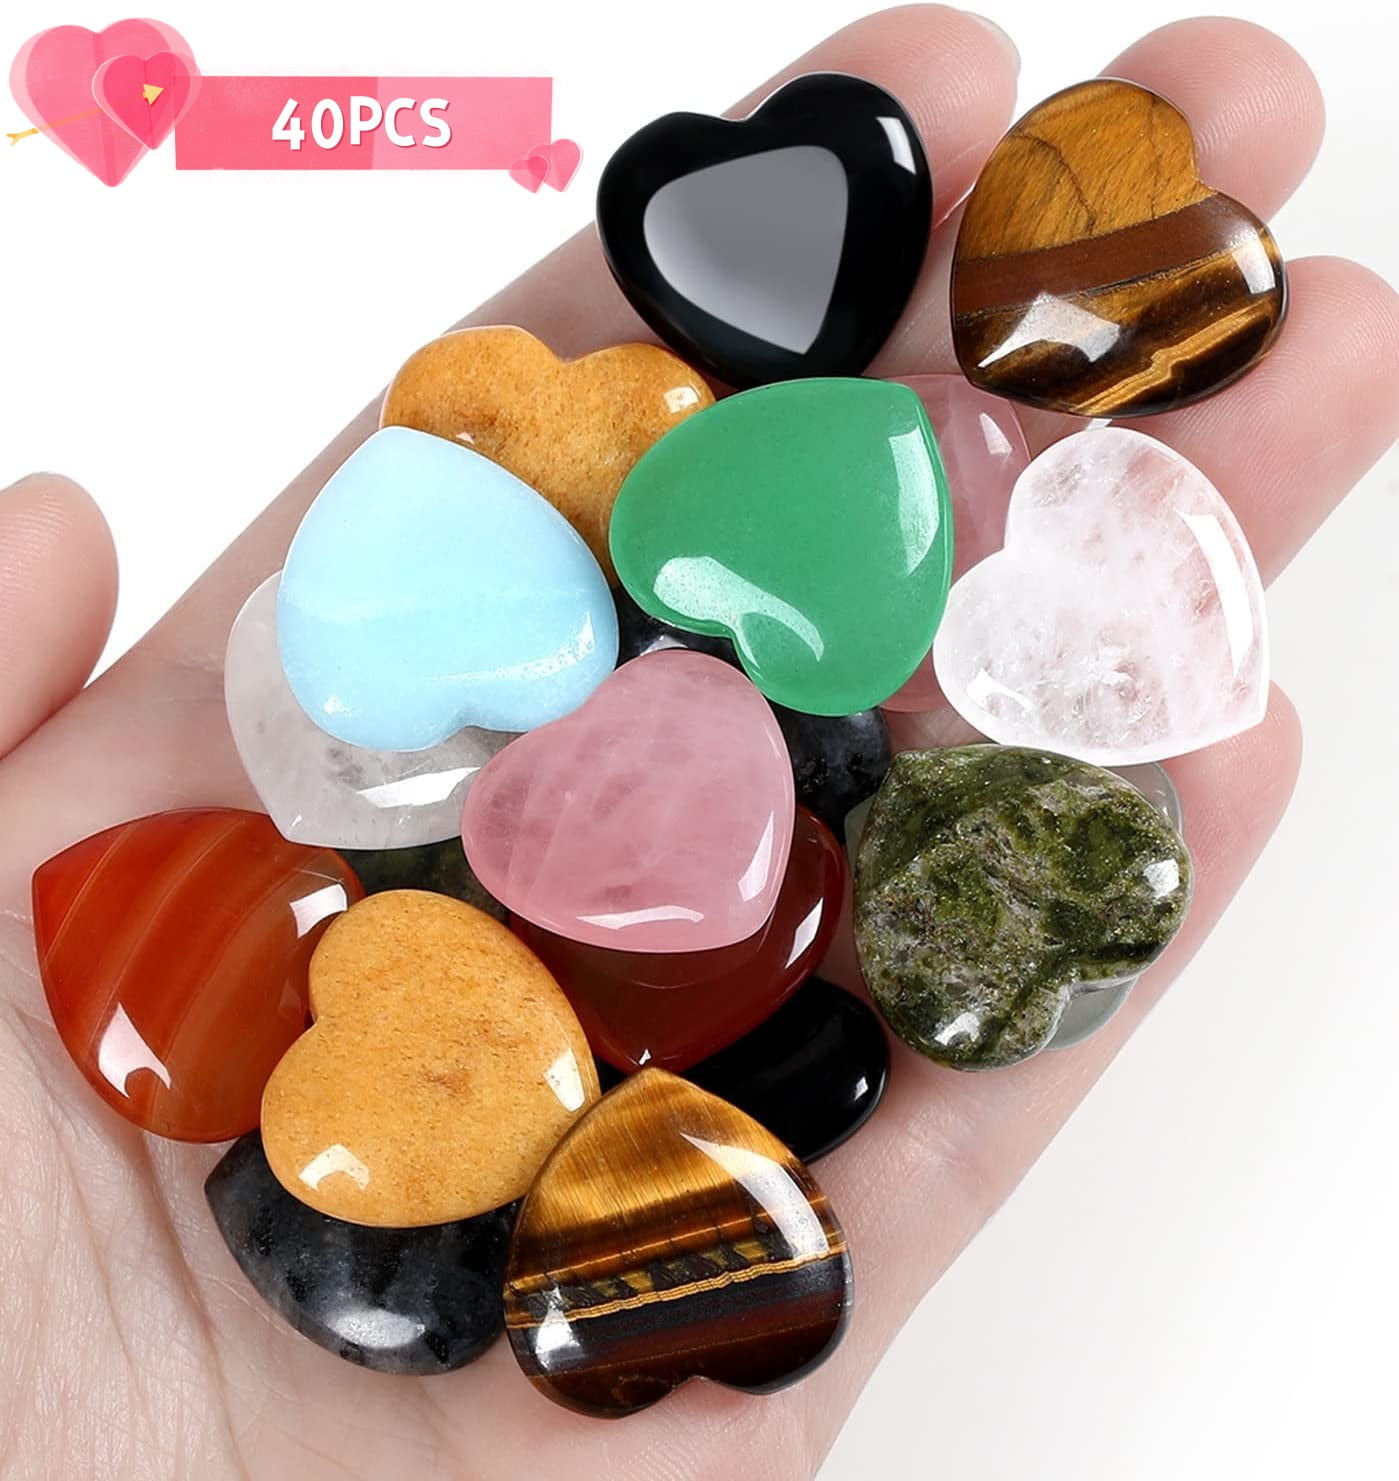 Bundle of 10PCS Rose Quartz Crystals Heart Thicken and 10PCS Colorful  Assorted Heart Crystals Stones 0.8 * 0.8 * 0.4